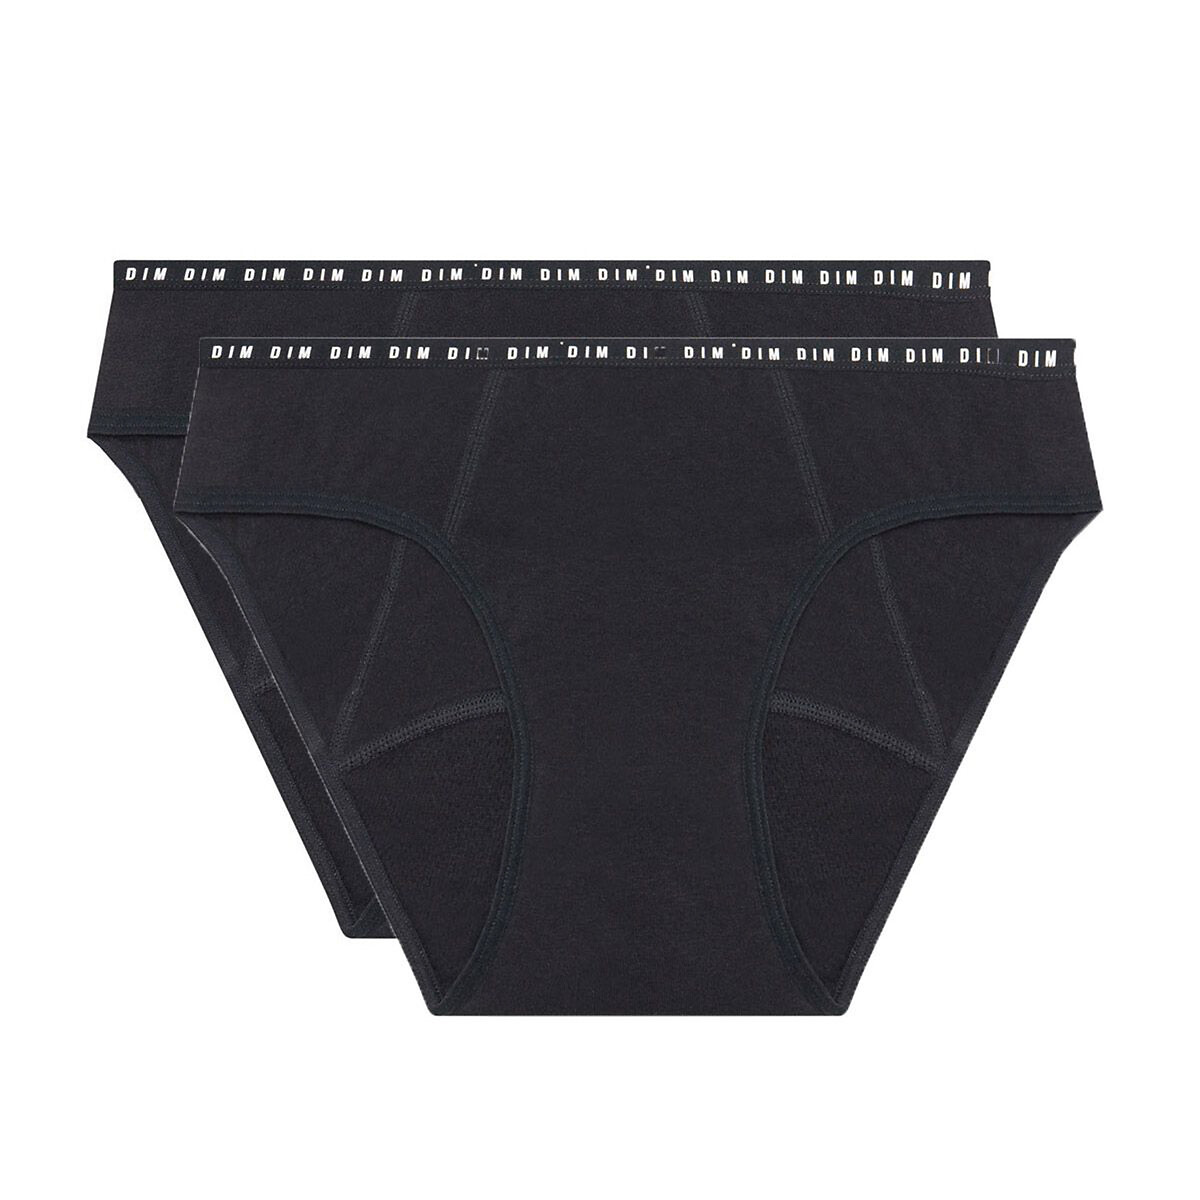 Heavy flow period knickers in cotton mix Dim